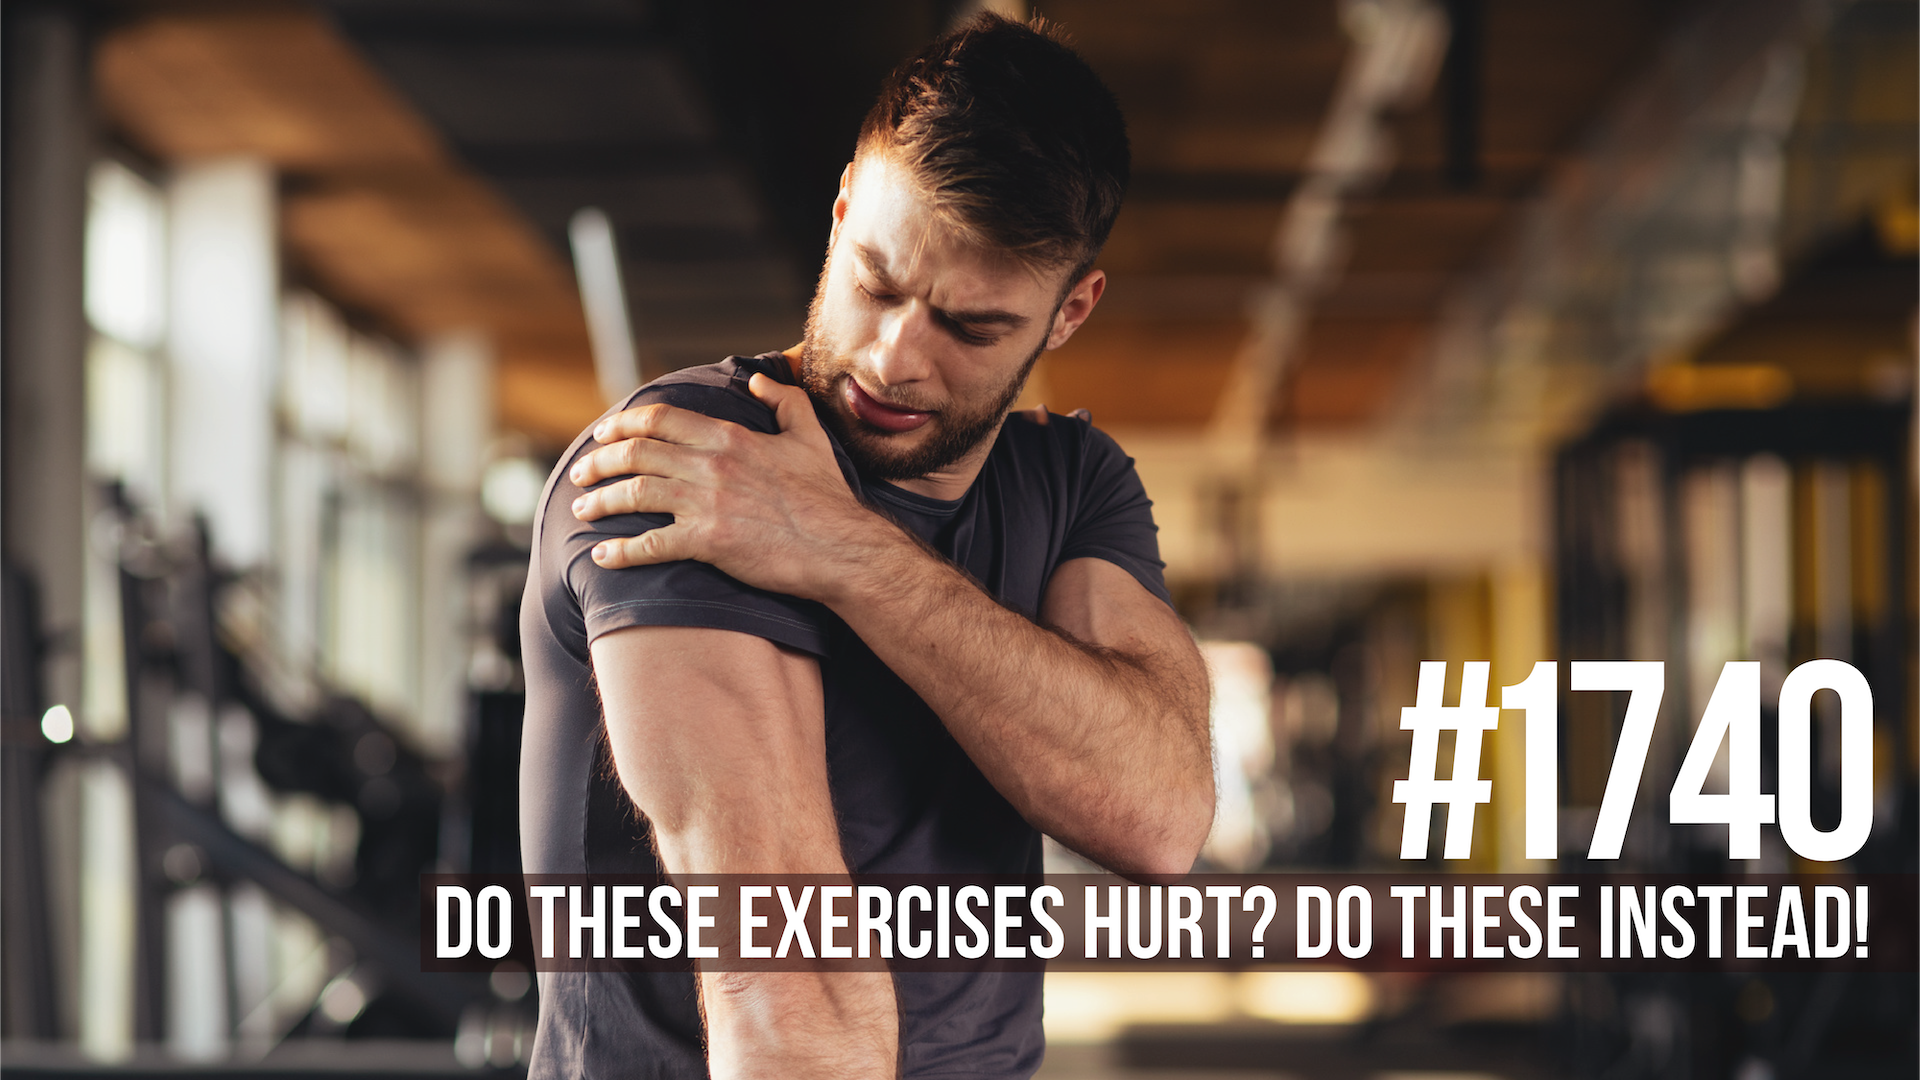 1740: Do These Exercises Hurt? Do These Instead!